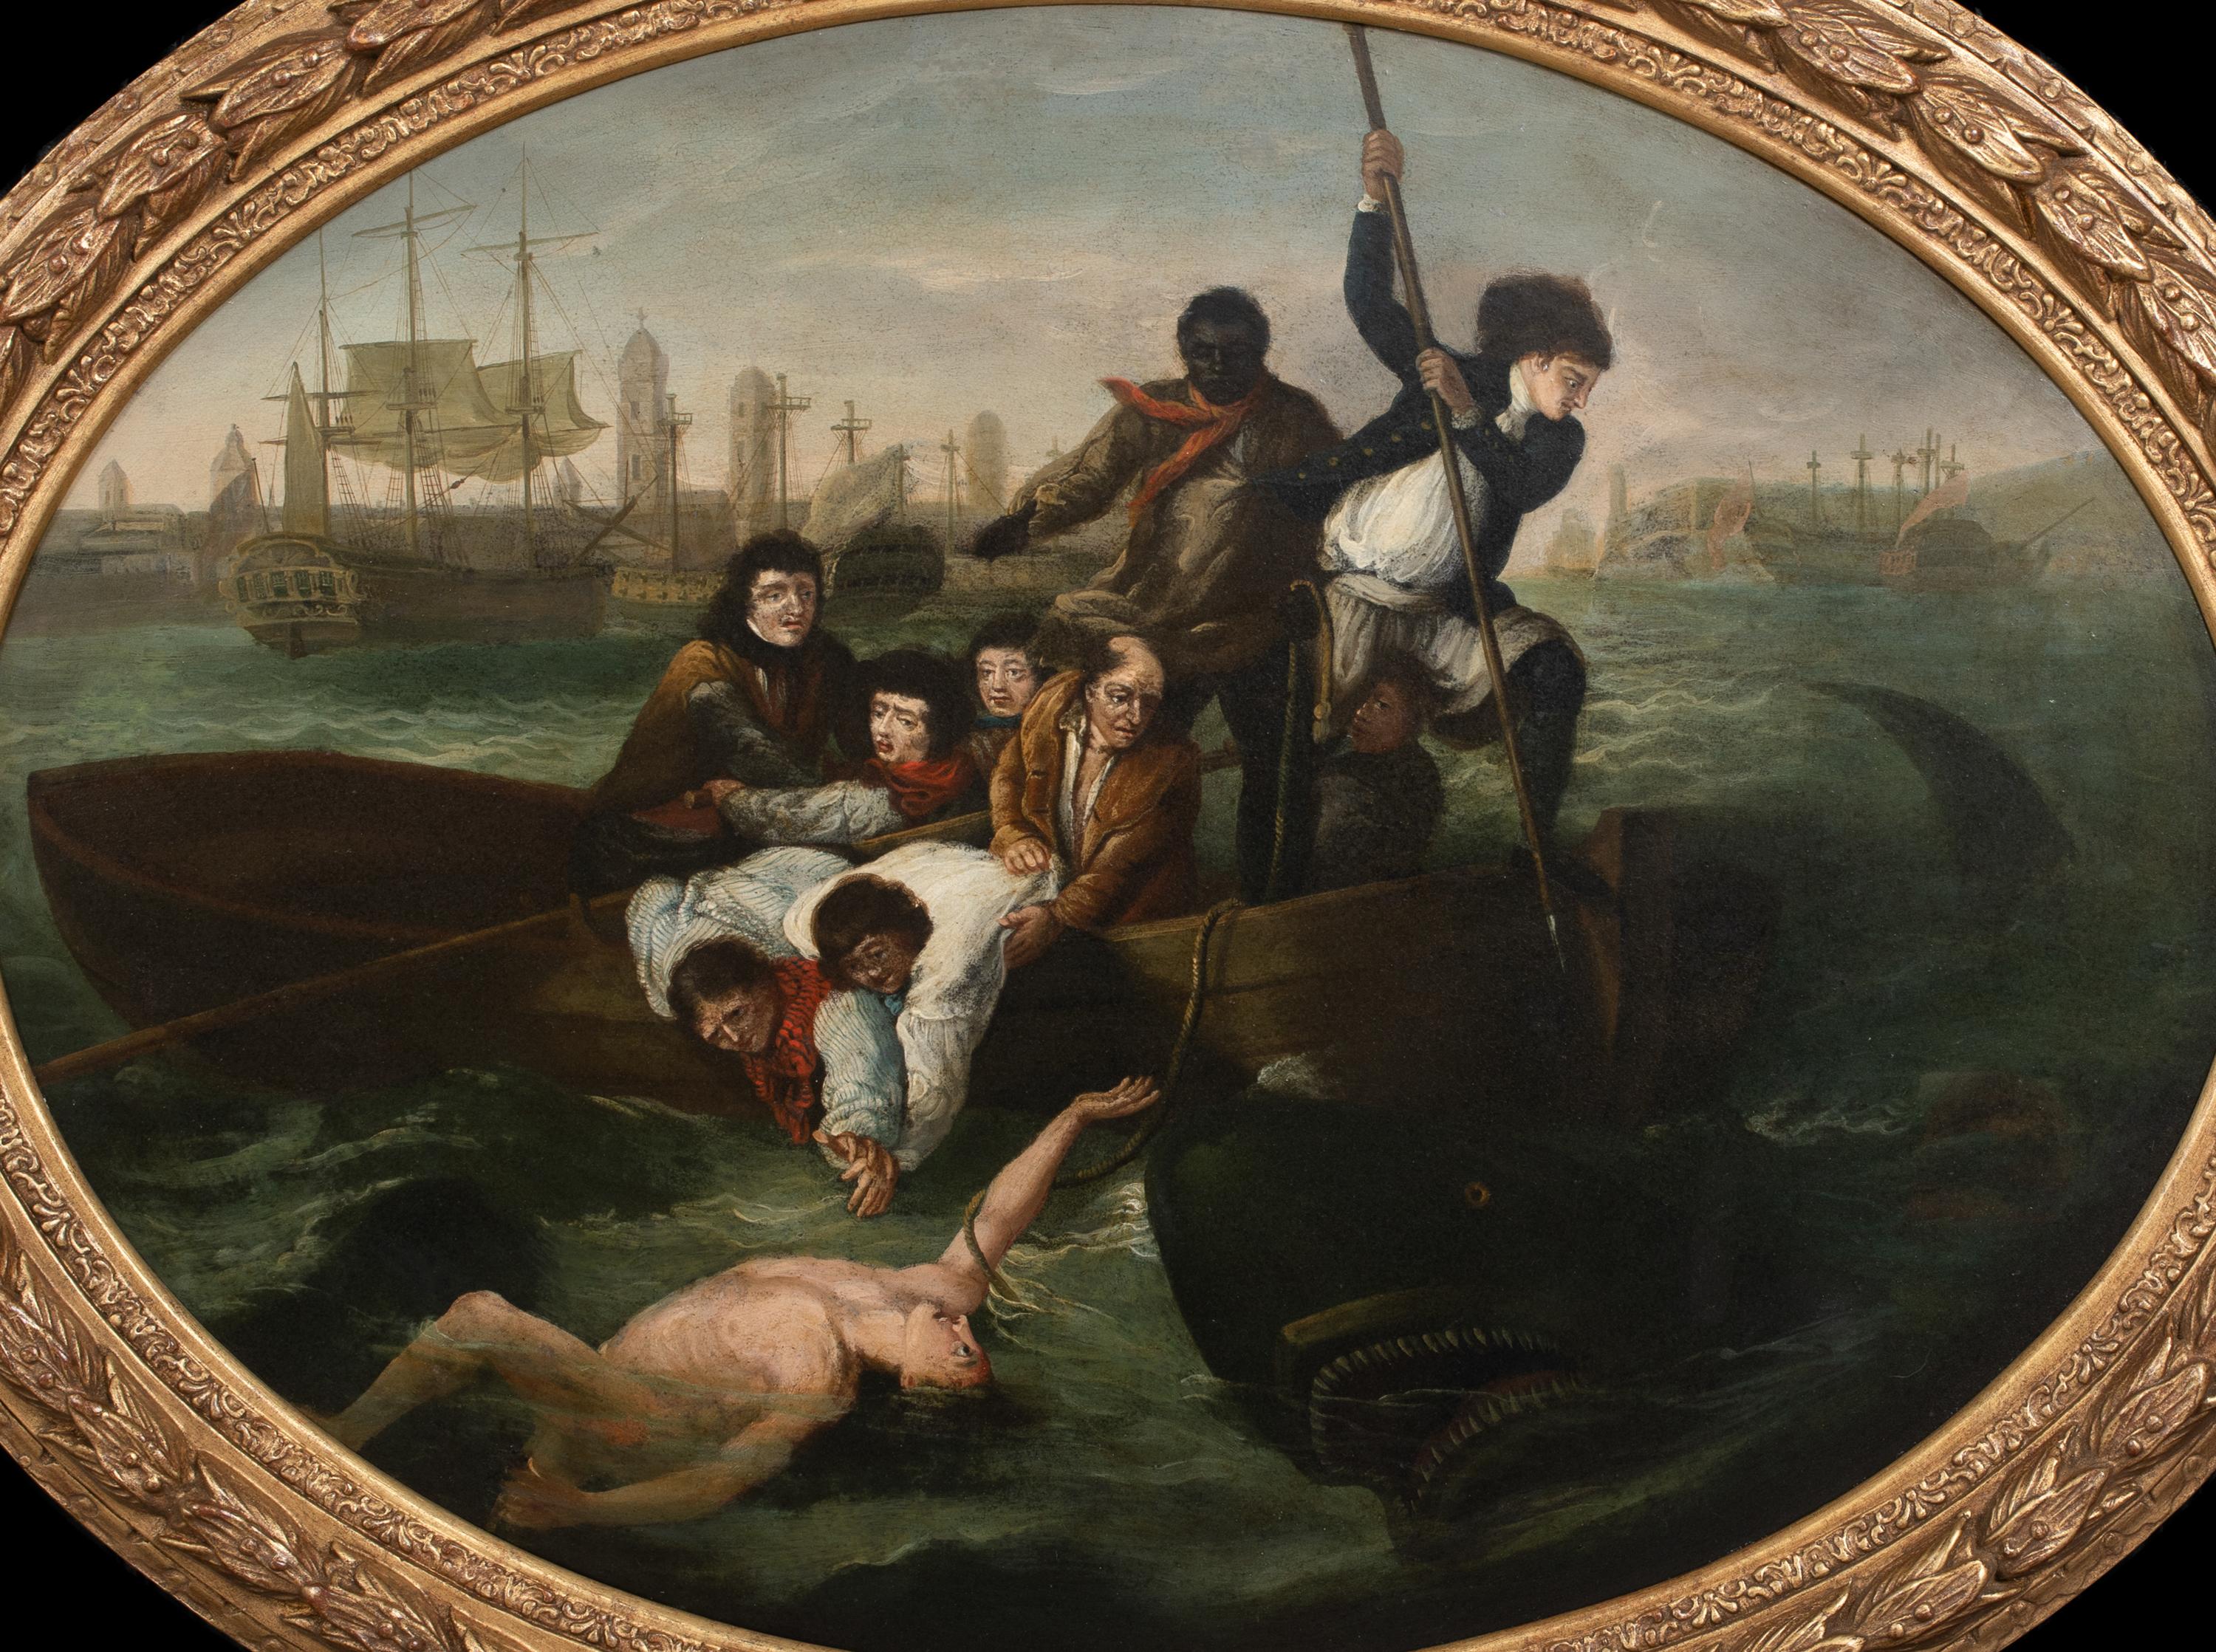 Watson And The Shark, 18th Century

JOHN SINGLETON COPLEY (1738-1815)

Large 18th Century scene of Watson And The Shark, oil on metal, John Singleton Copley. Excellent quality and condition late 18th century scene of 14 year old English boy Brook